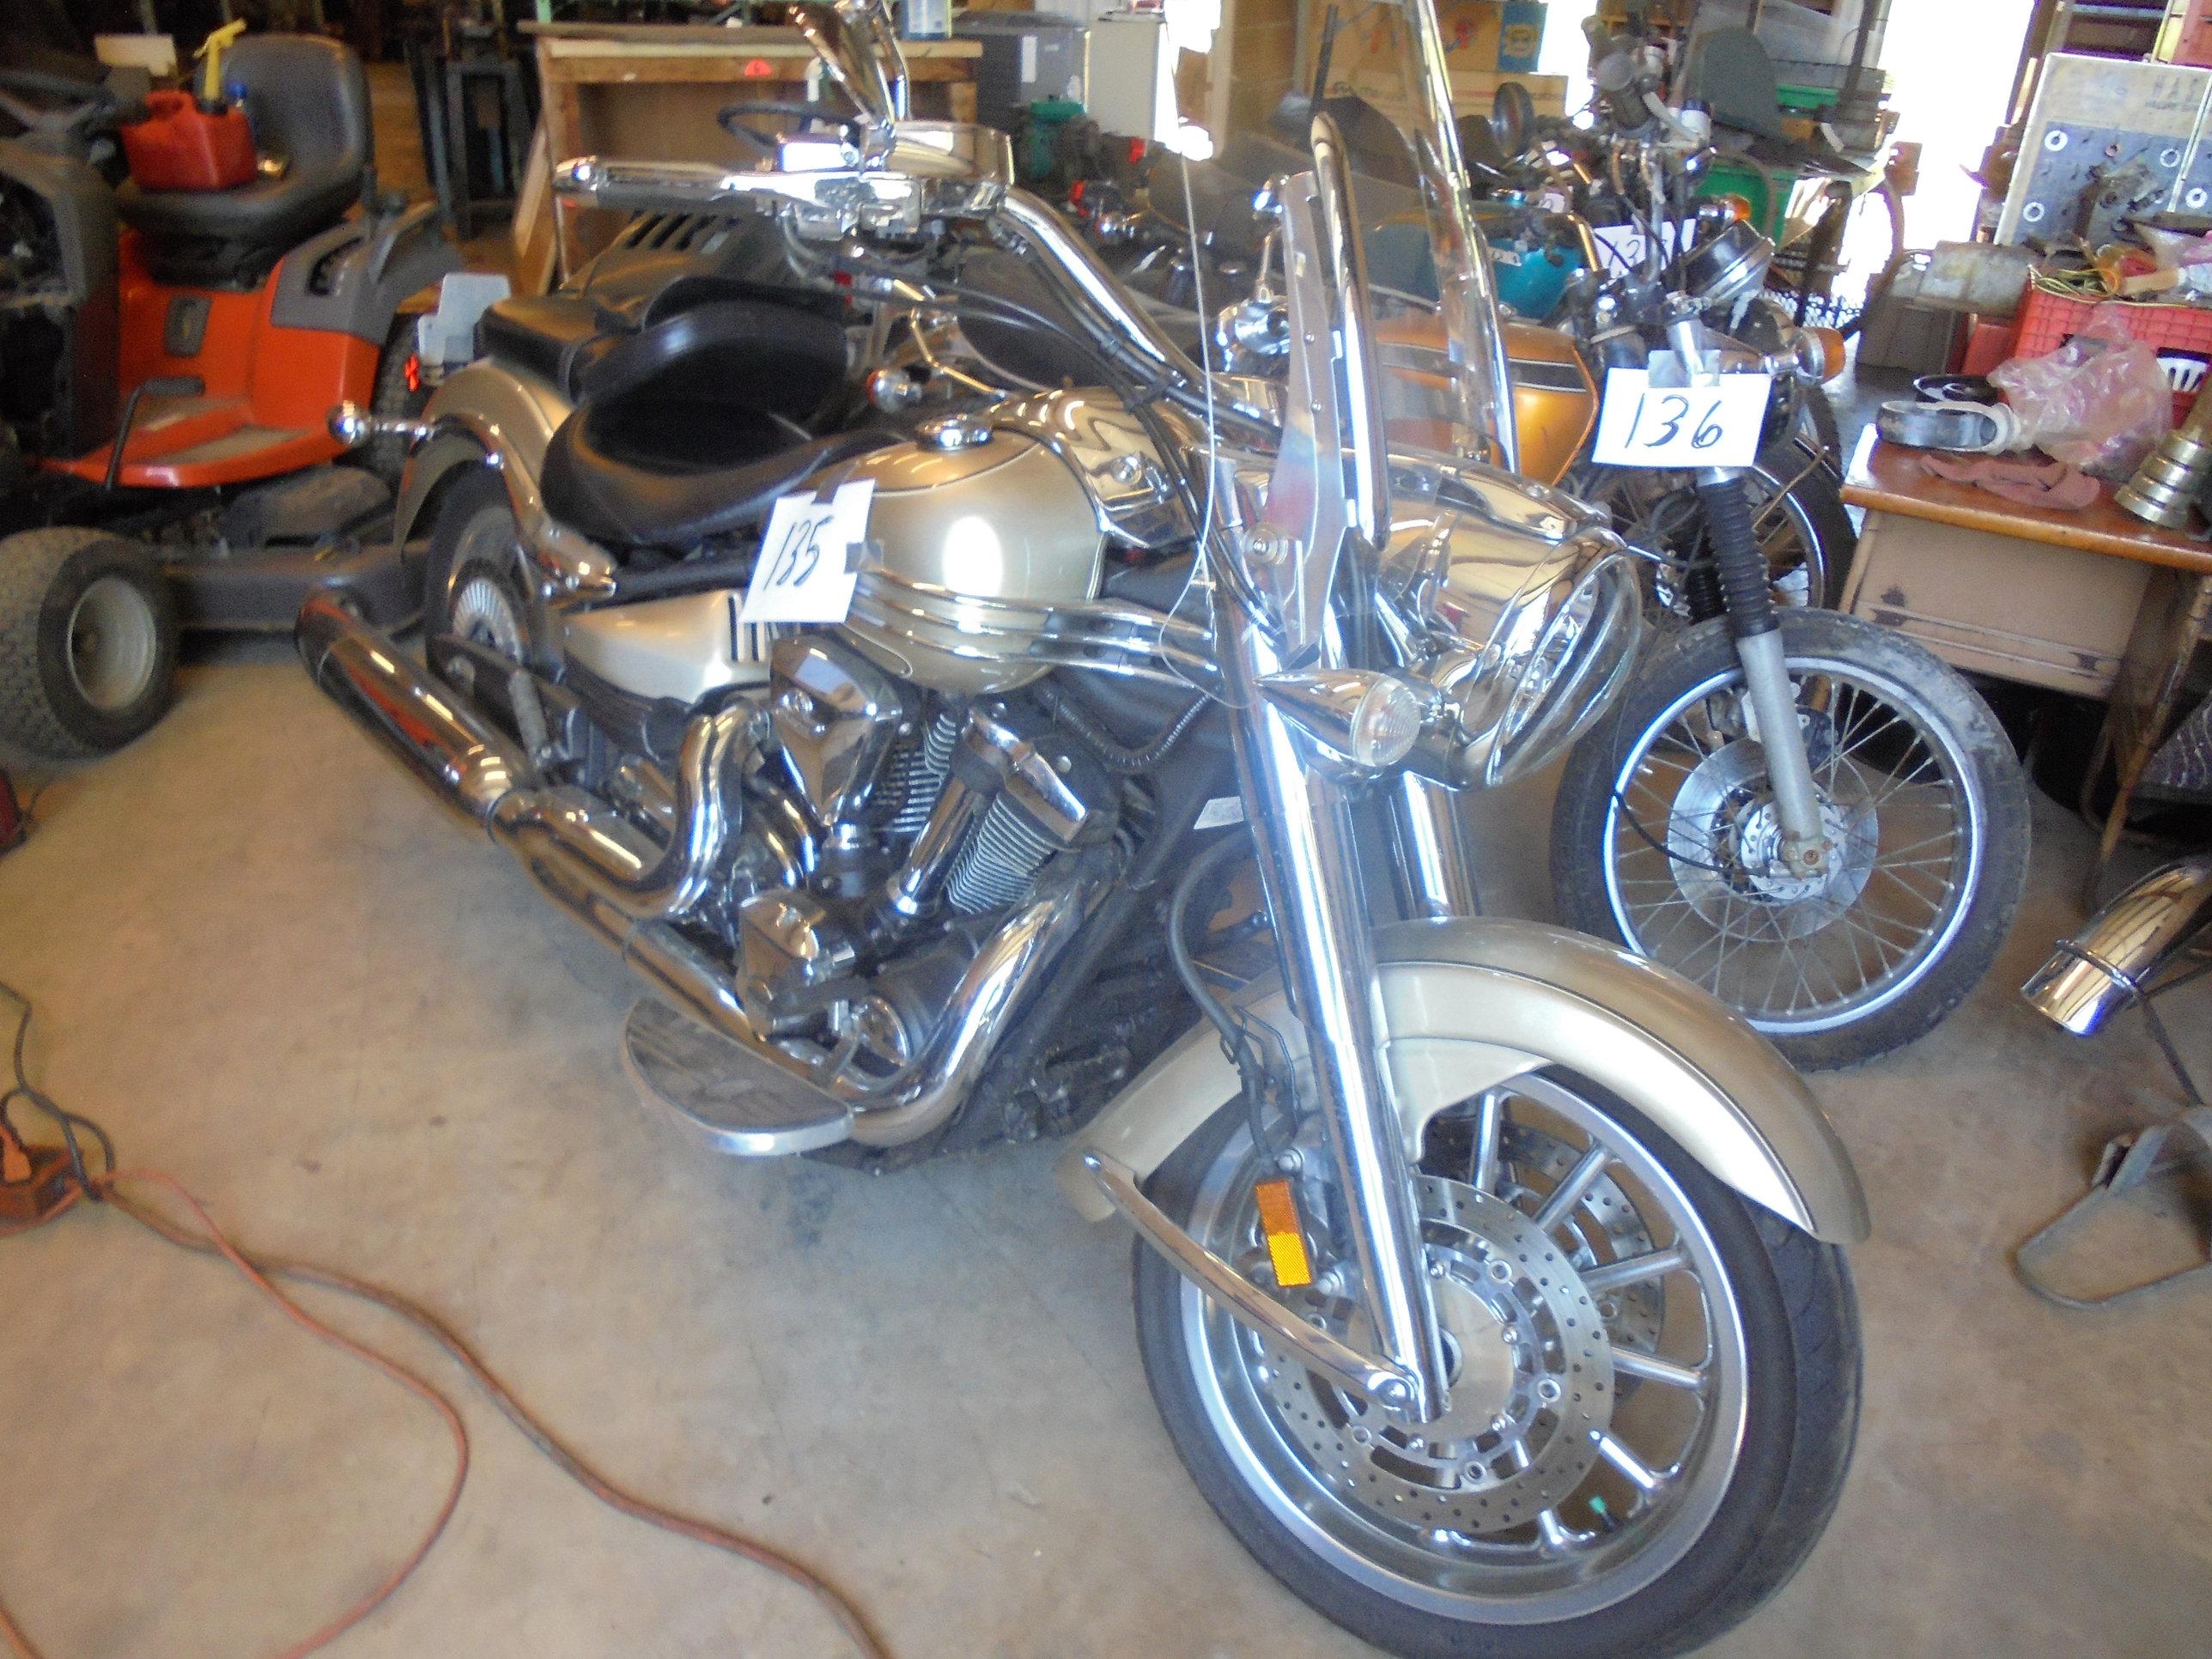 2008 Yamaha Motorcycle, 1900cc, Like New, New Tires, 7770 Miles, One Owner, Showroom Clean